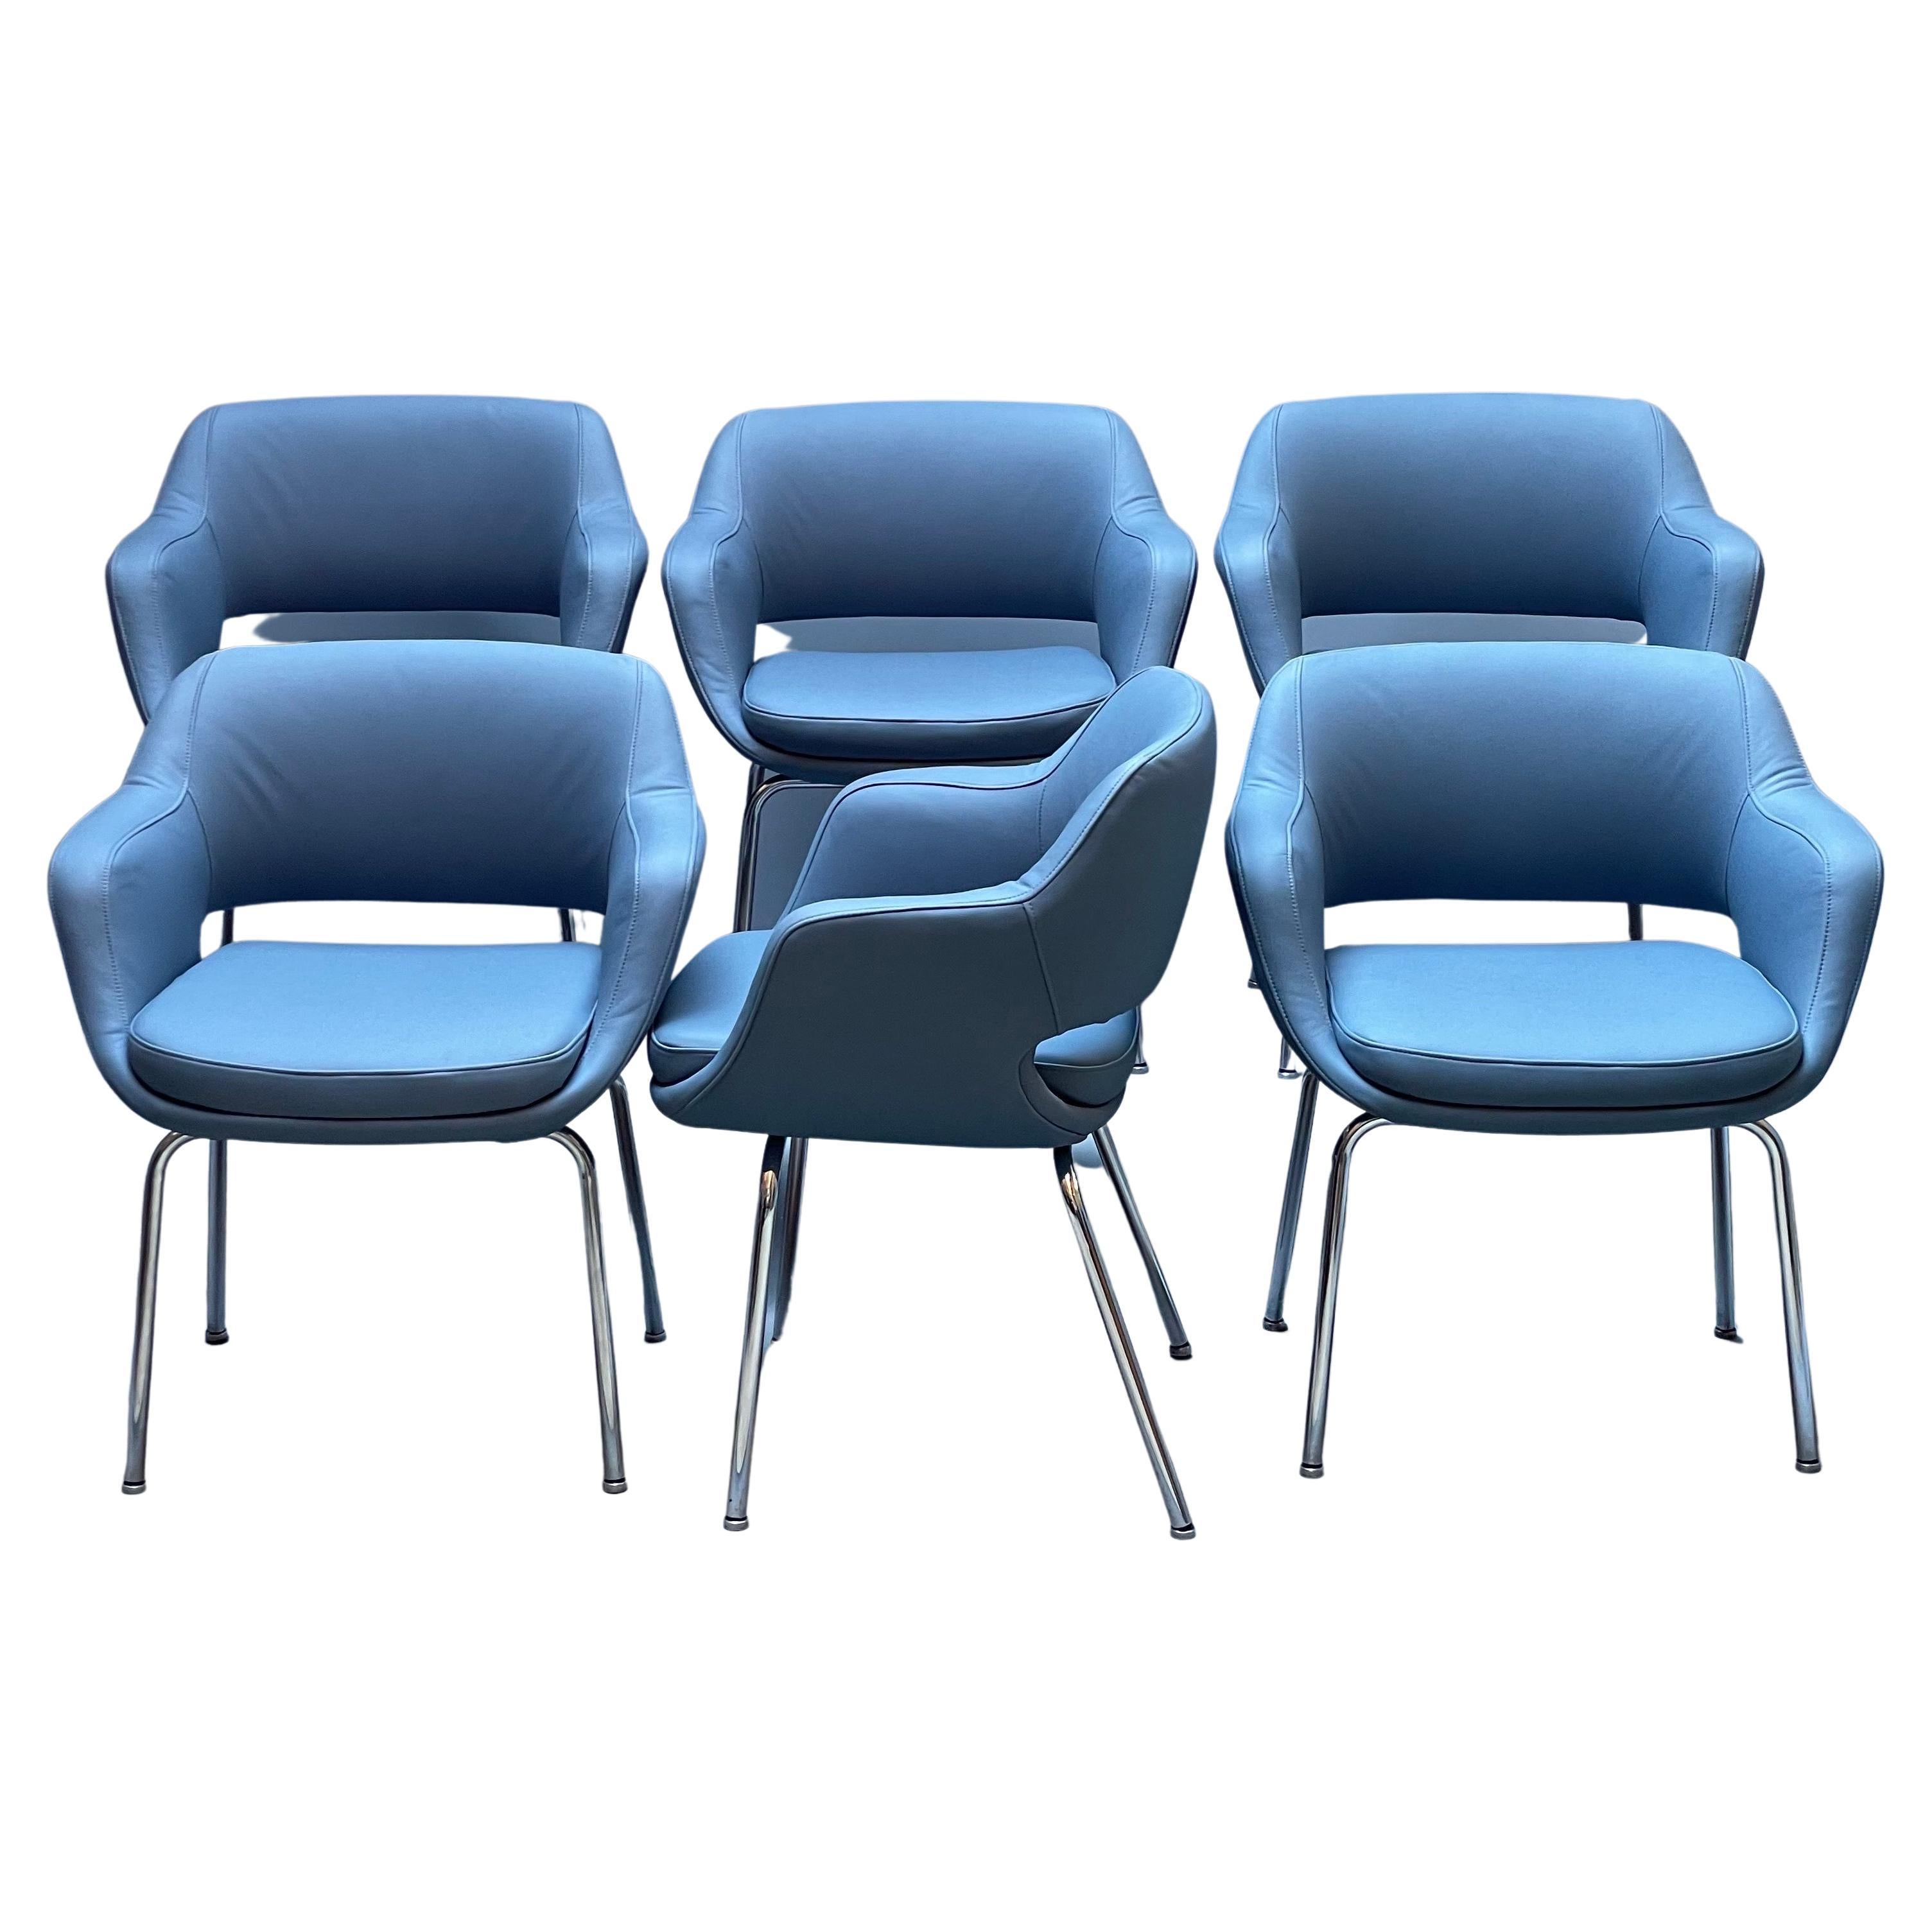 Set of 6 Kilta Armchairs, design by Olli Mannermaa for Cassina